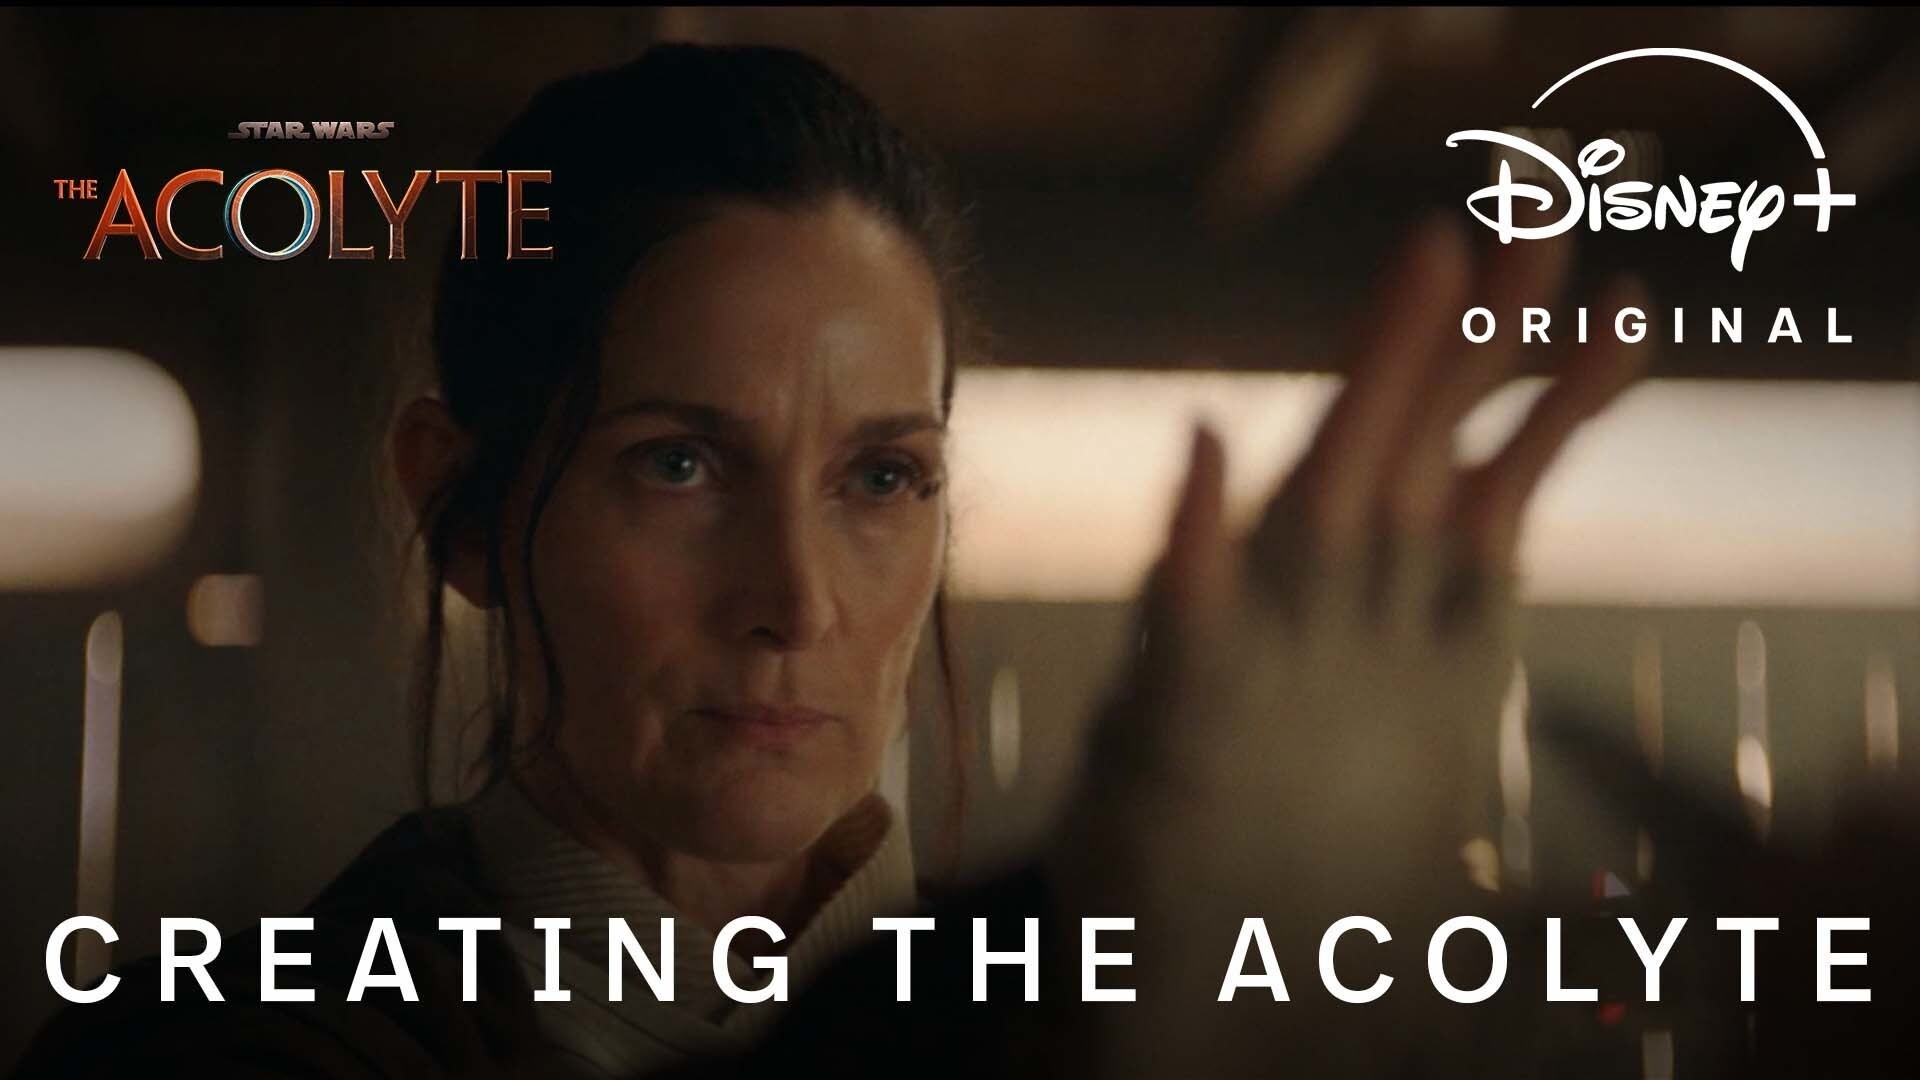 The Acolyte | Creating The Acolyte | Streaming June 4 on Disney+